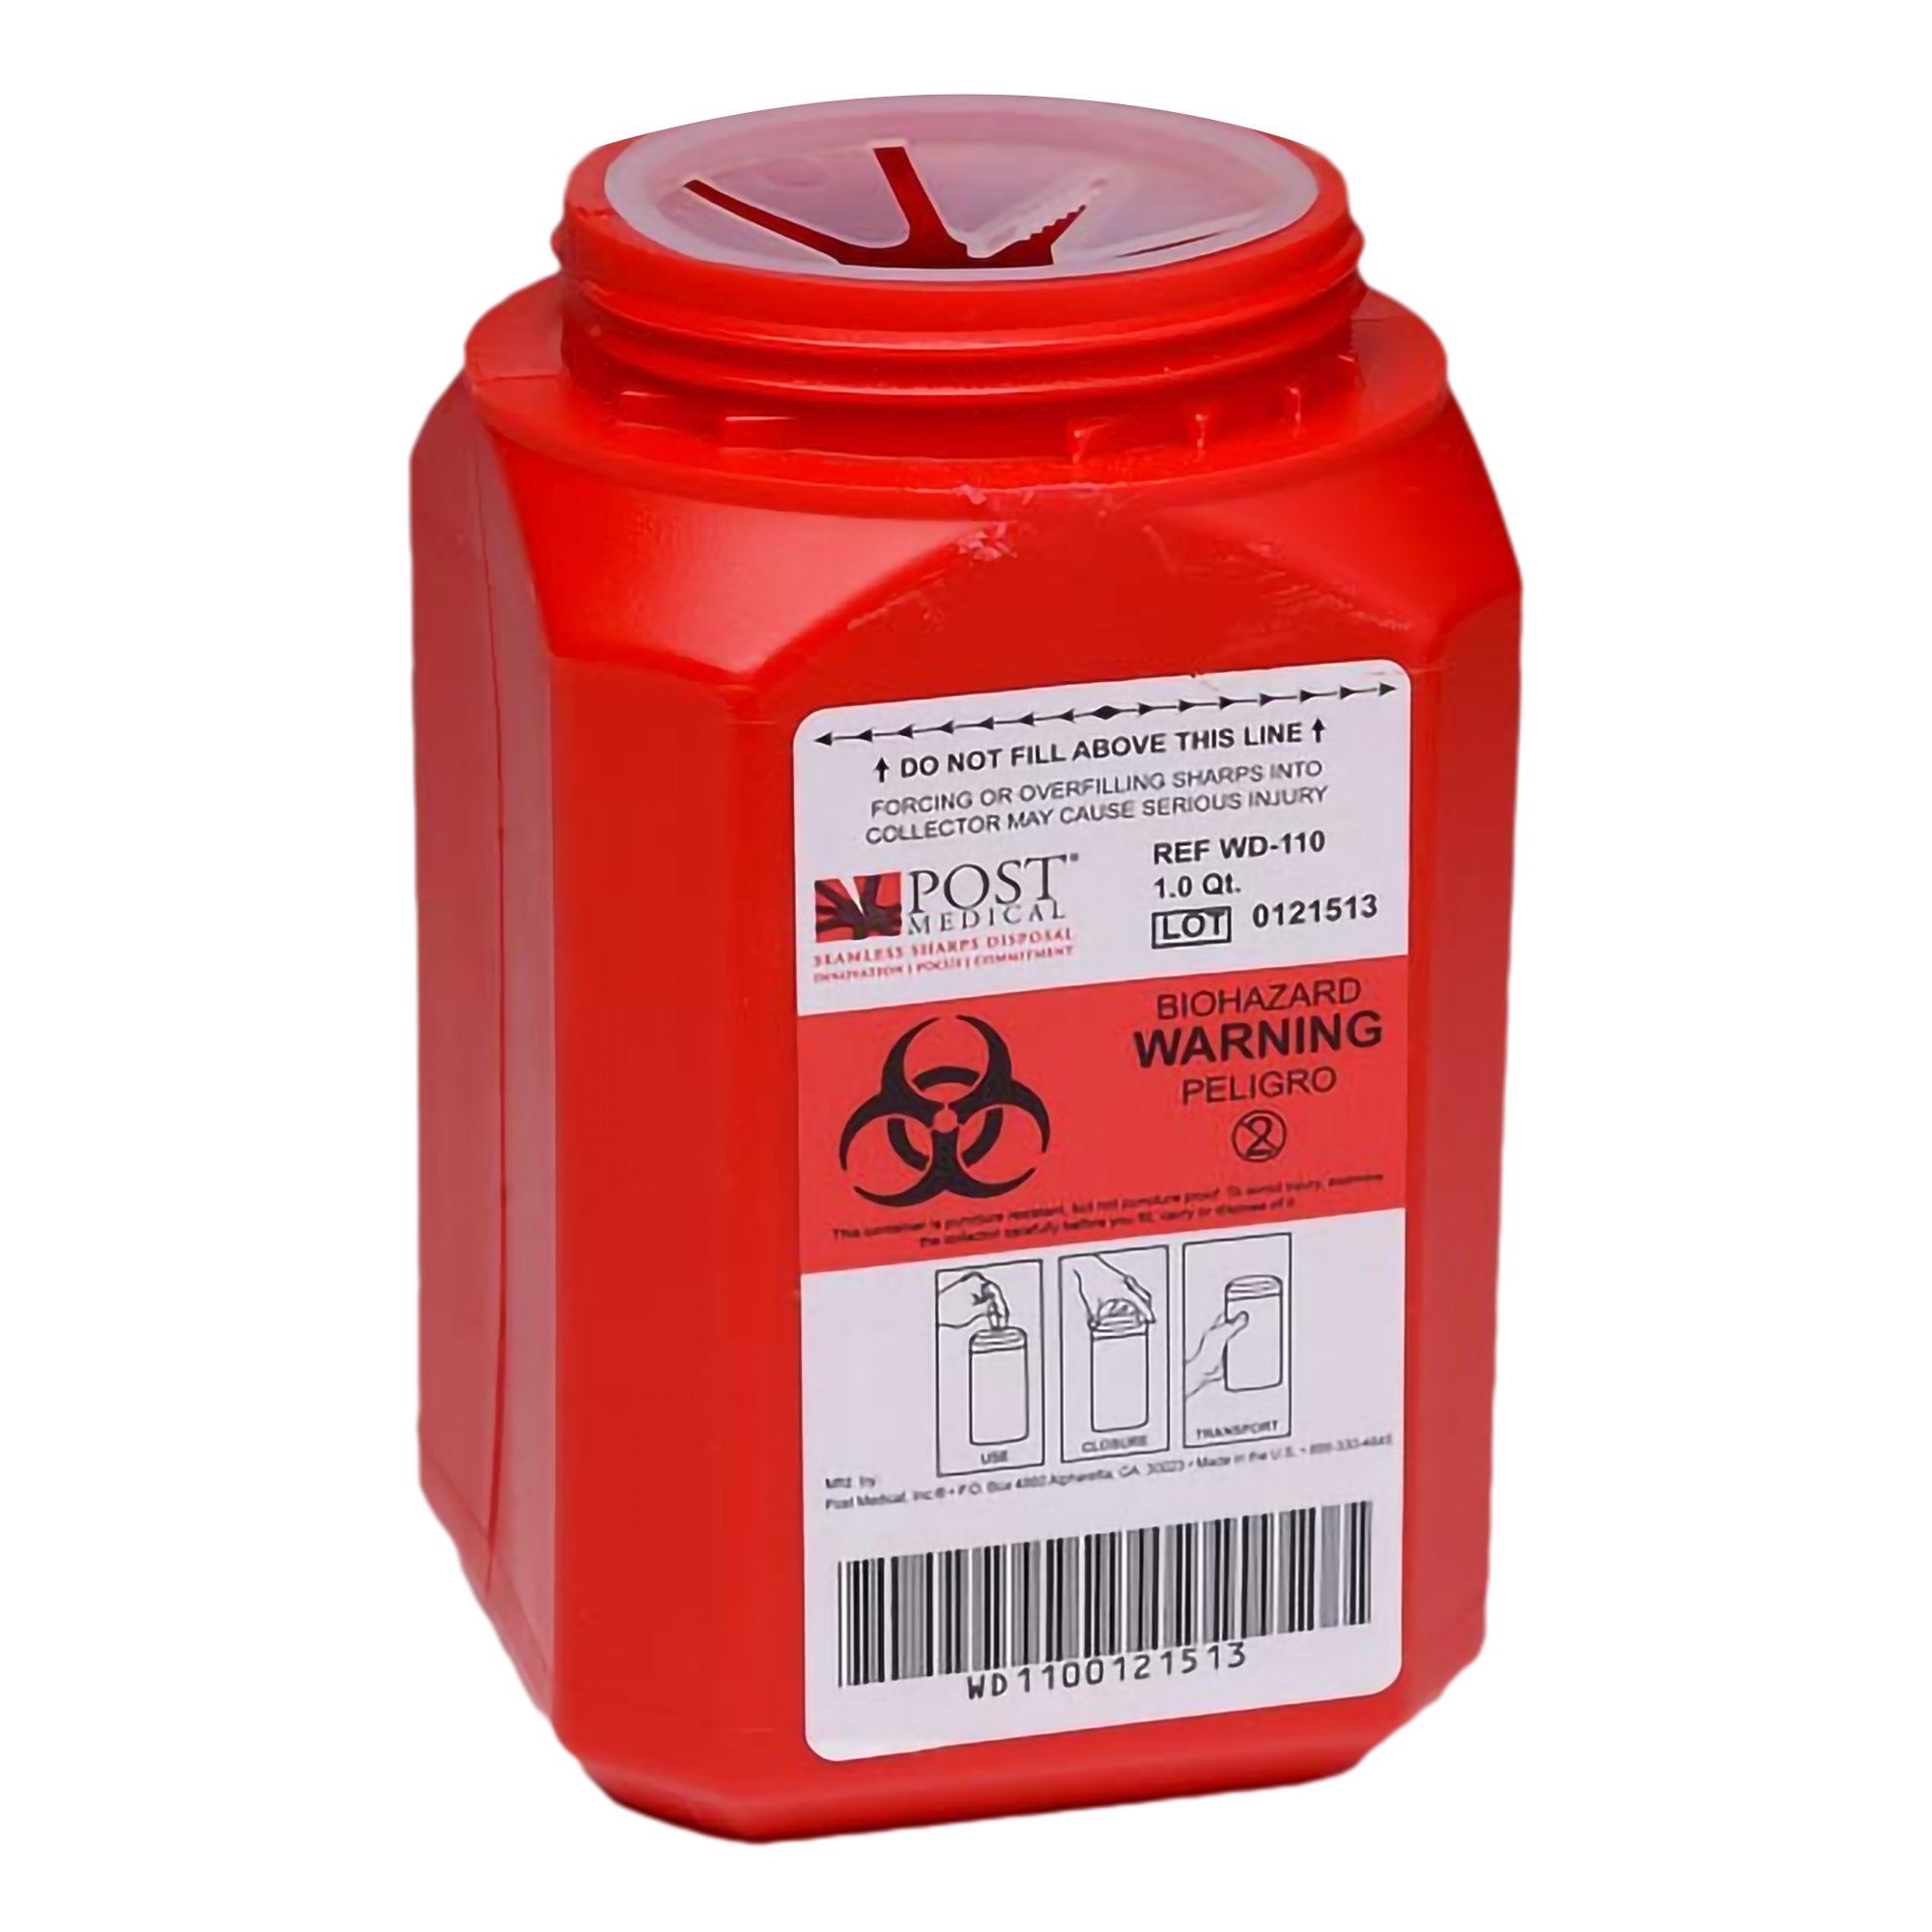 Sharps Container Red Base Vertical Entry 0.25 Gallon